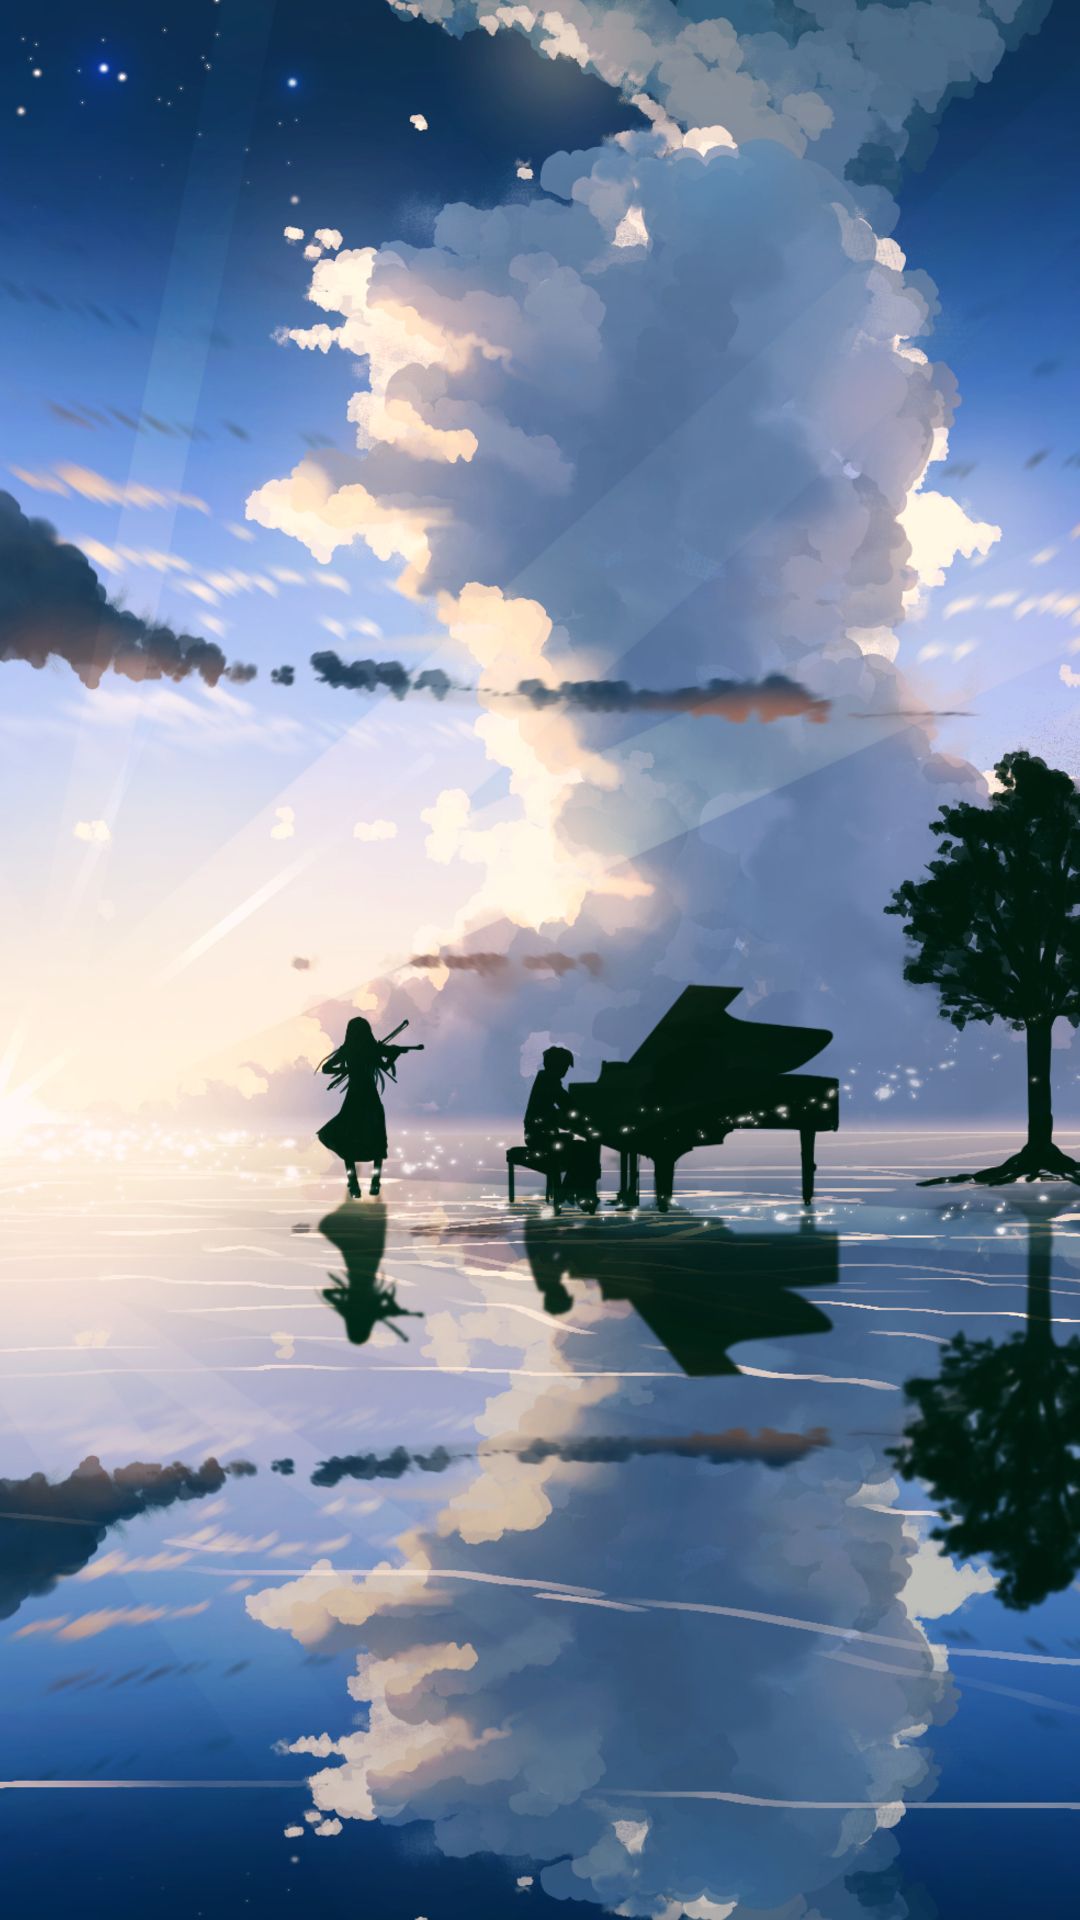 6095938 / 1080x1920 your lie in april, anime, artwork, artist, digital art, hd, anime girl, piano for Iphone 6, 7, 8 wallpapers